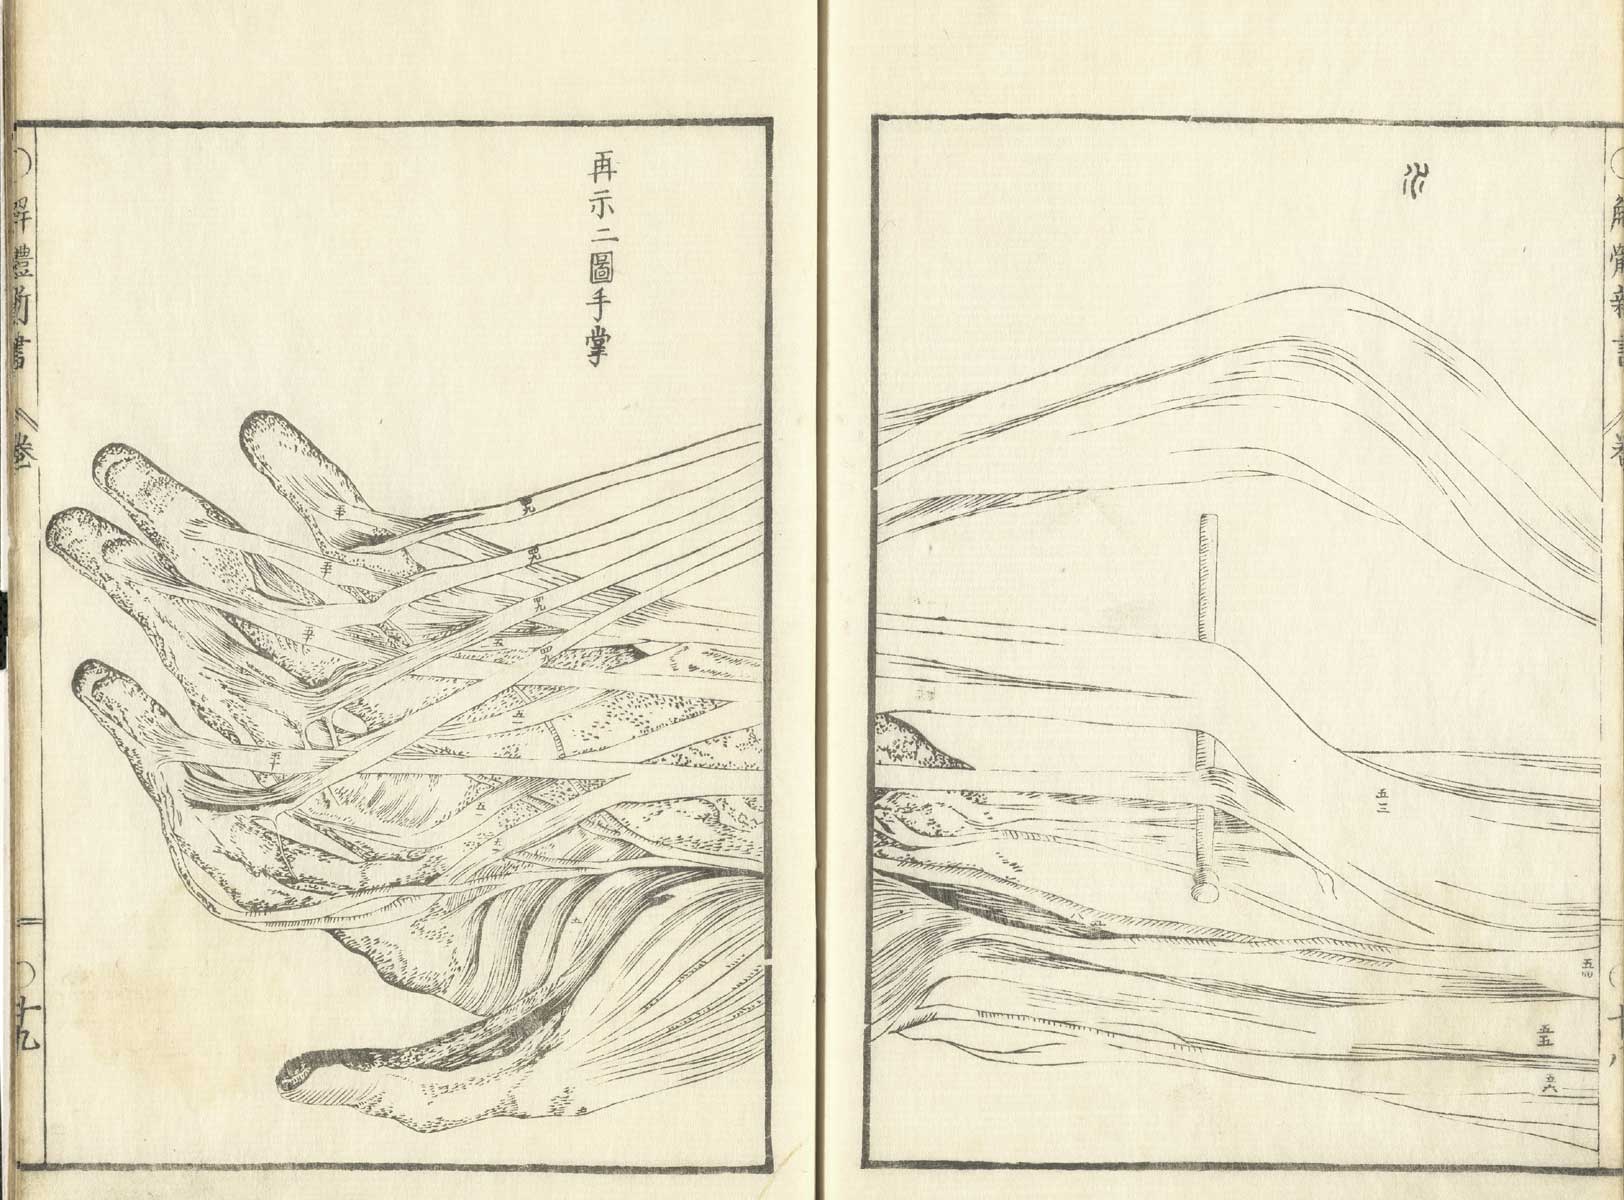 Pages 18 and 19 of Johann Adam Kulmus' Kaitai shinsho, featuring the muscles and tendons of a flayed right hand and forearm illustrated across both pages.